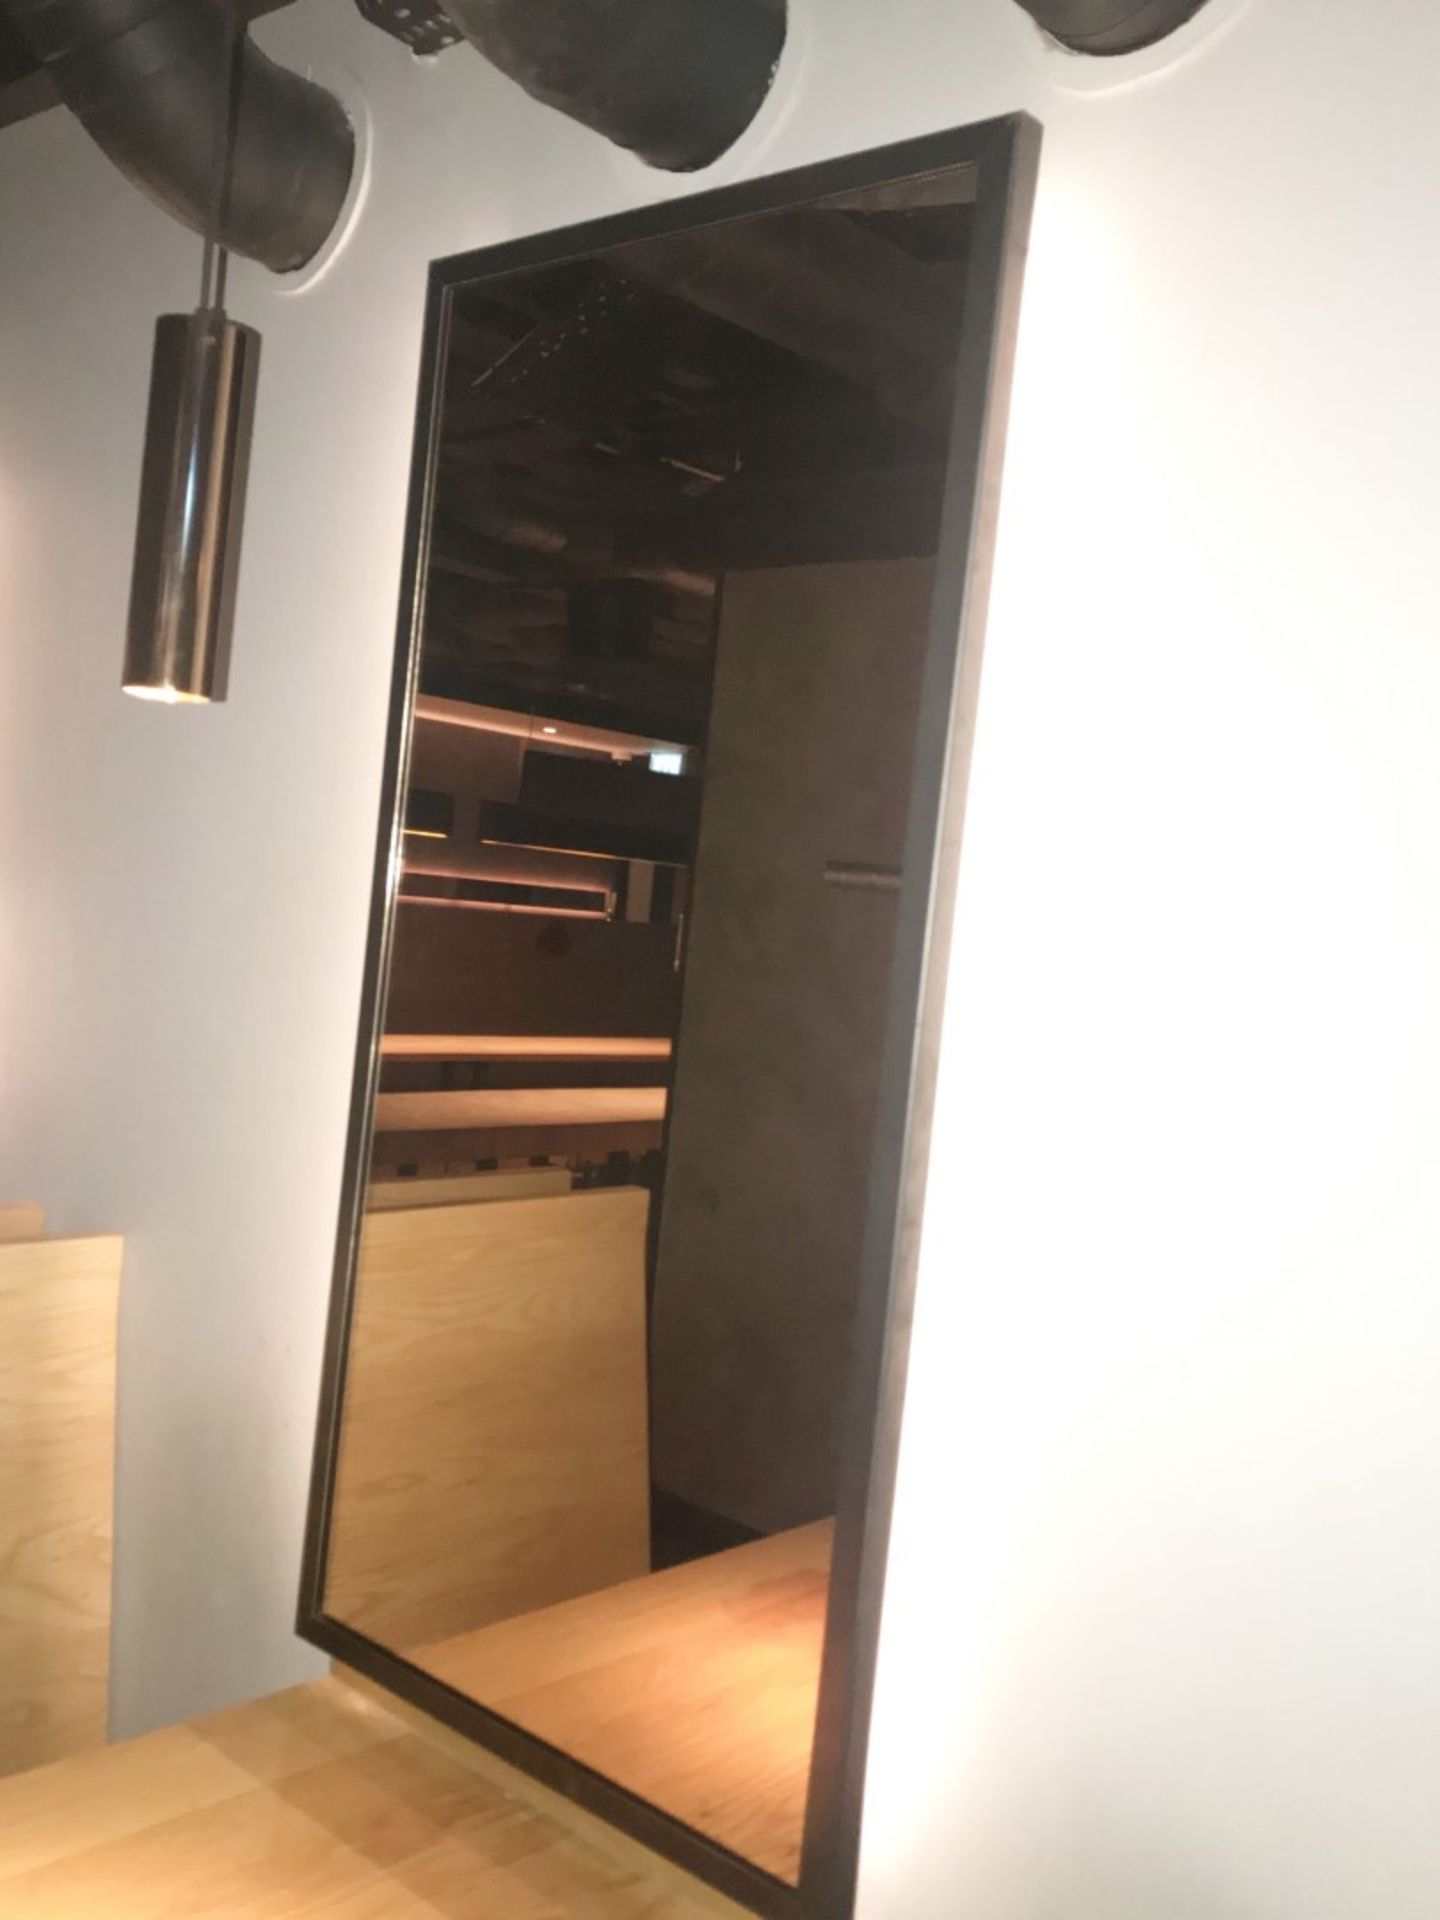 3 x Backlift Wall Mirrors - CL584 - Location: London W1F IN2C12349